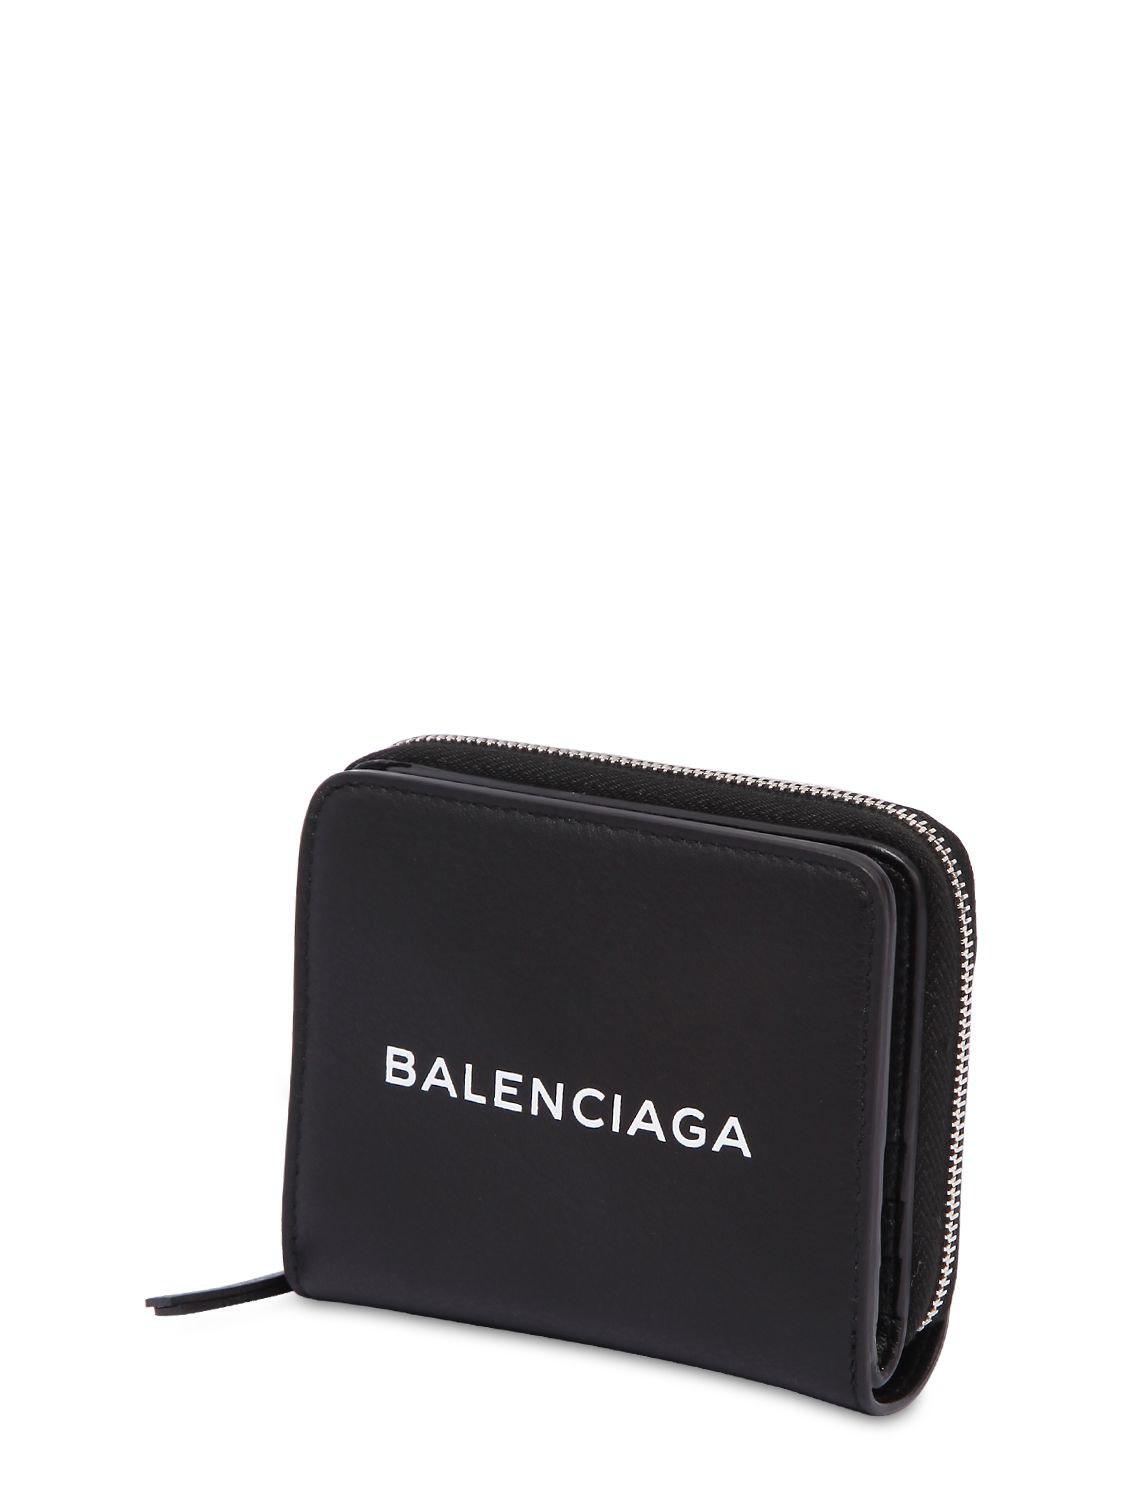 Balenciaga Small Zip Around Leather Wallet in Black | Lyst